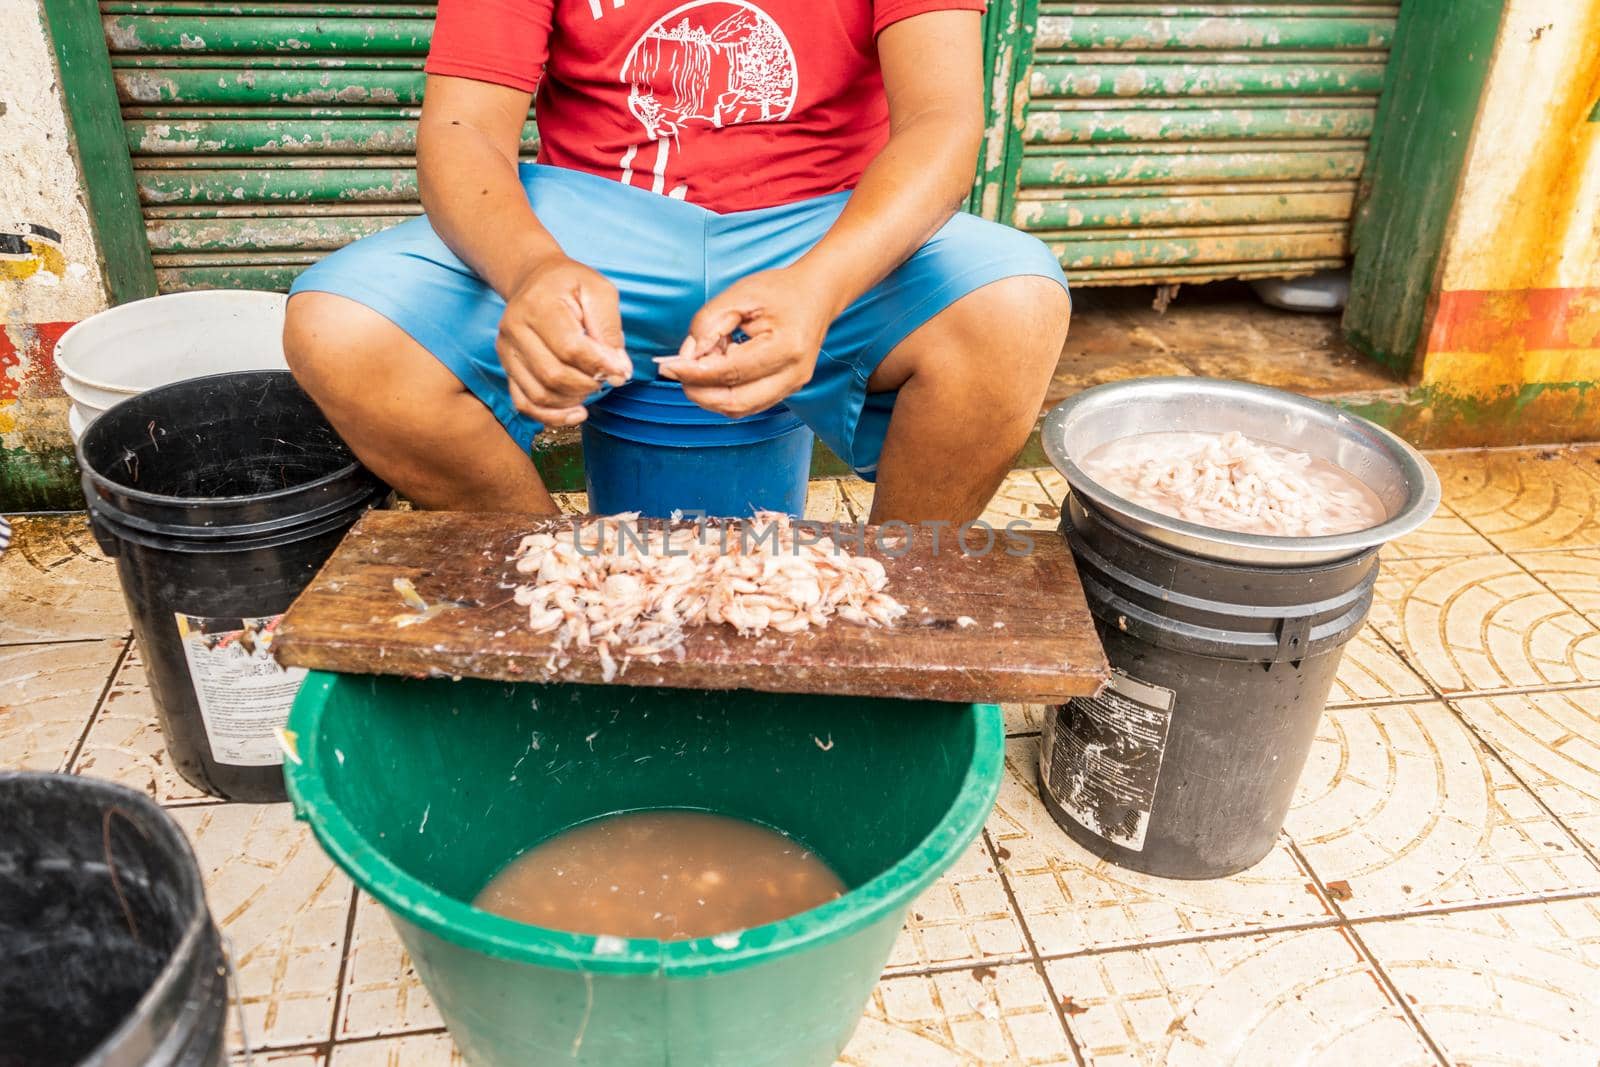 Unrecognizable man peeling shrimp in the street of a seafood market in Bluefields Nicaragua